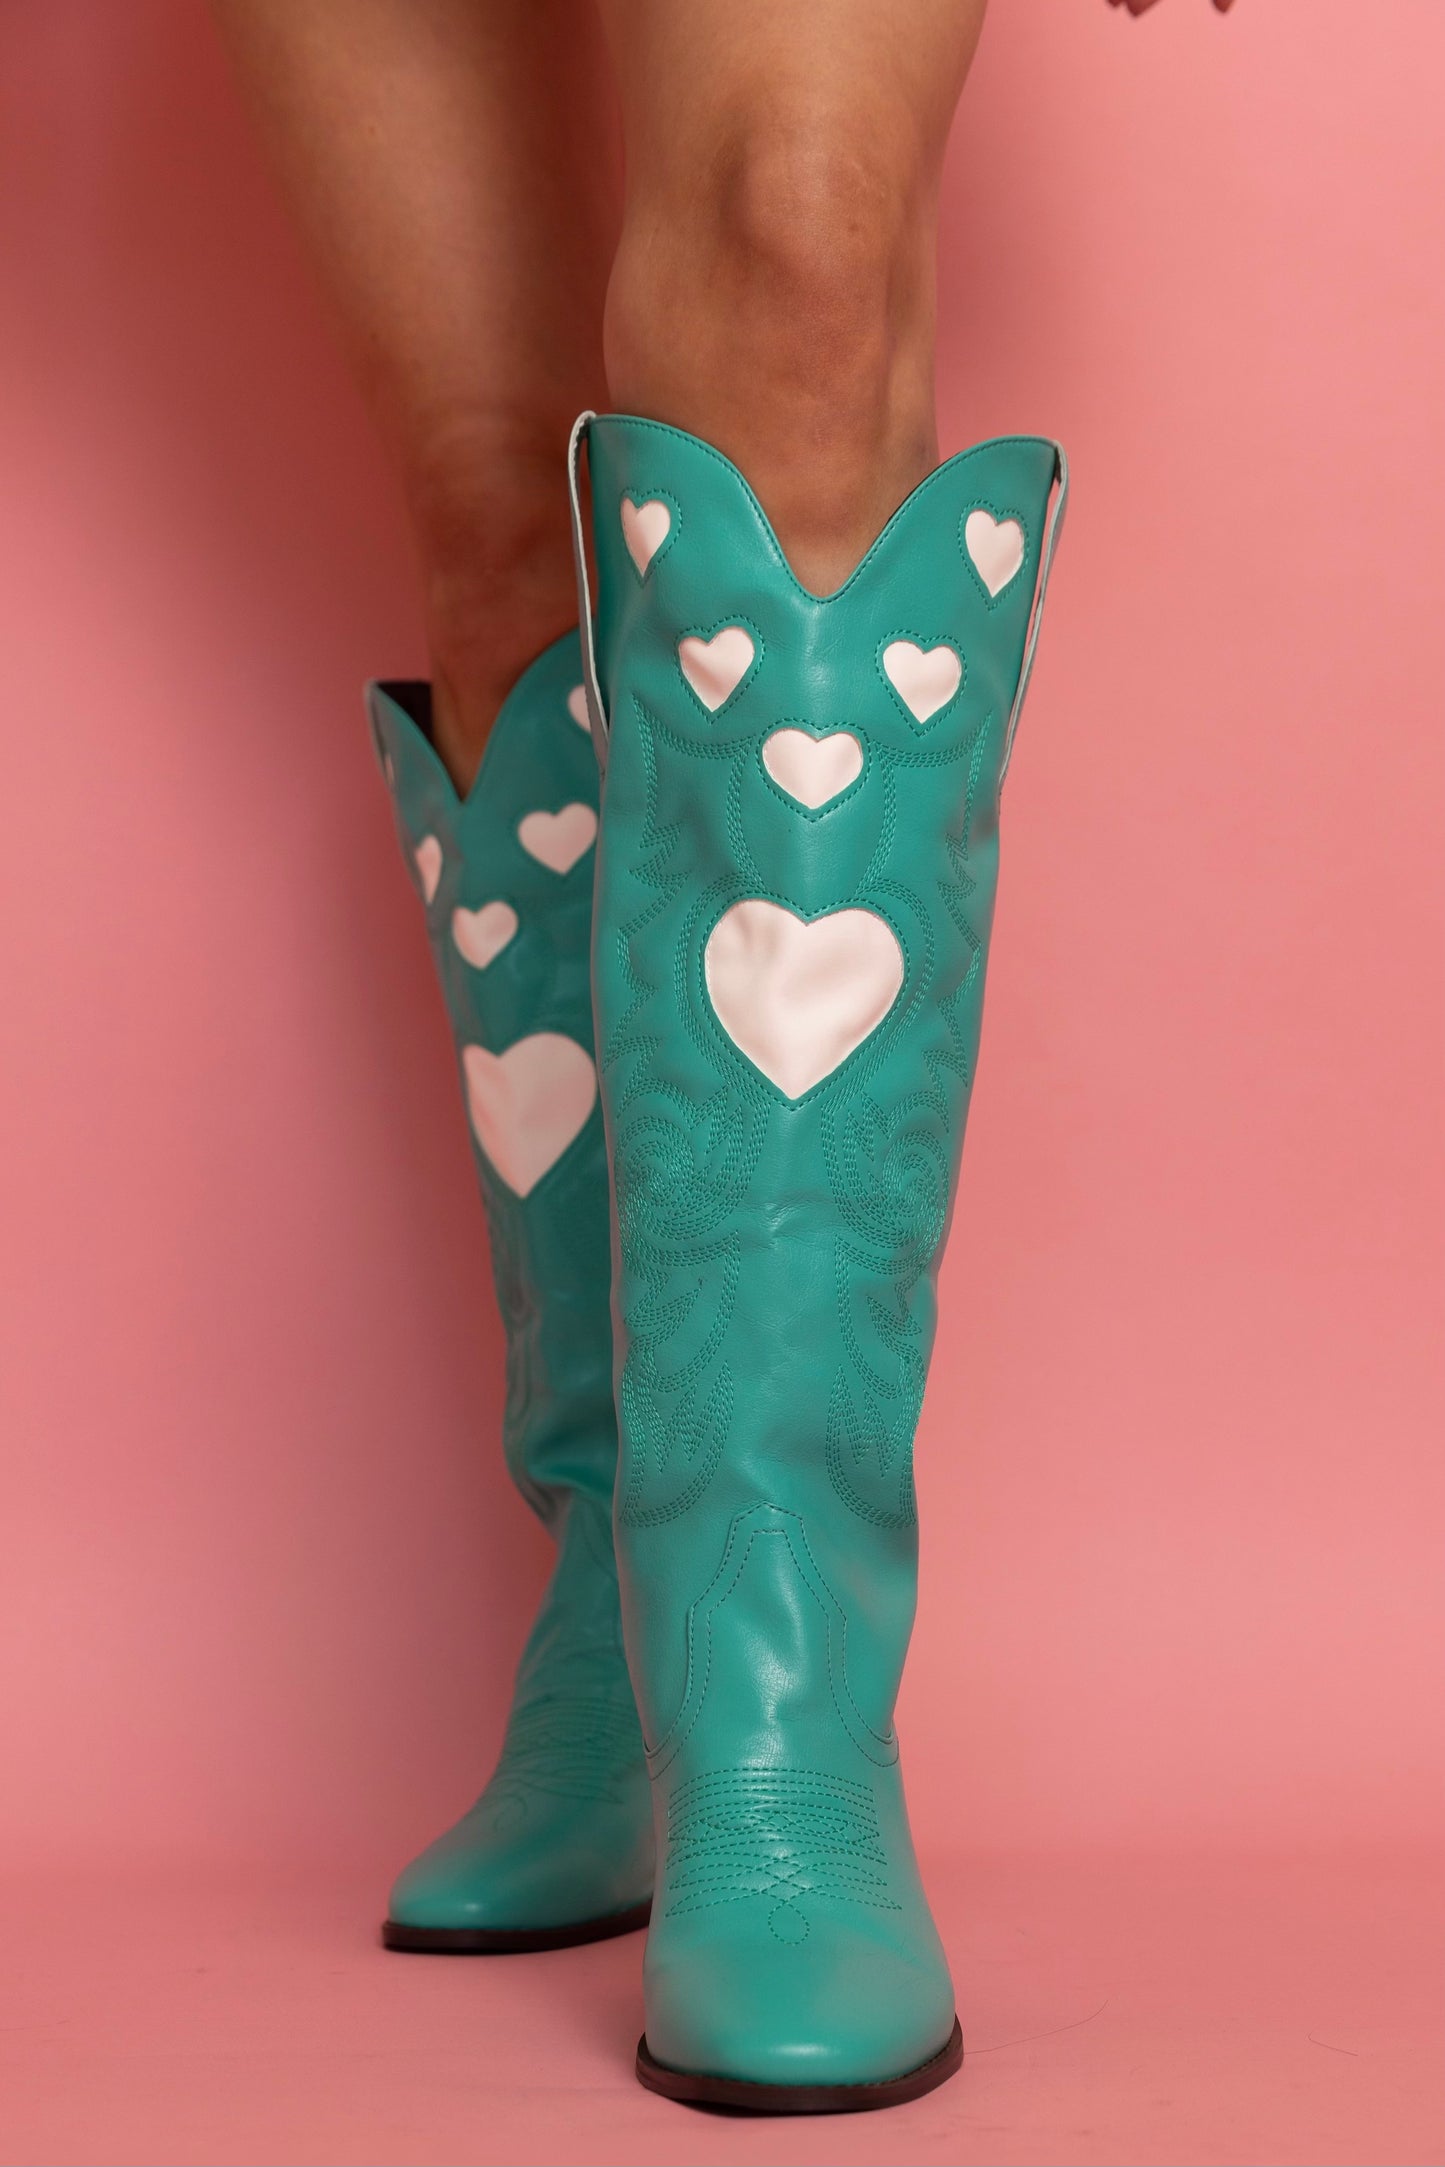 Lover Girl Cowgirl Boots